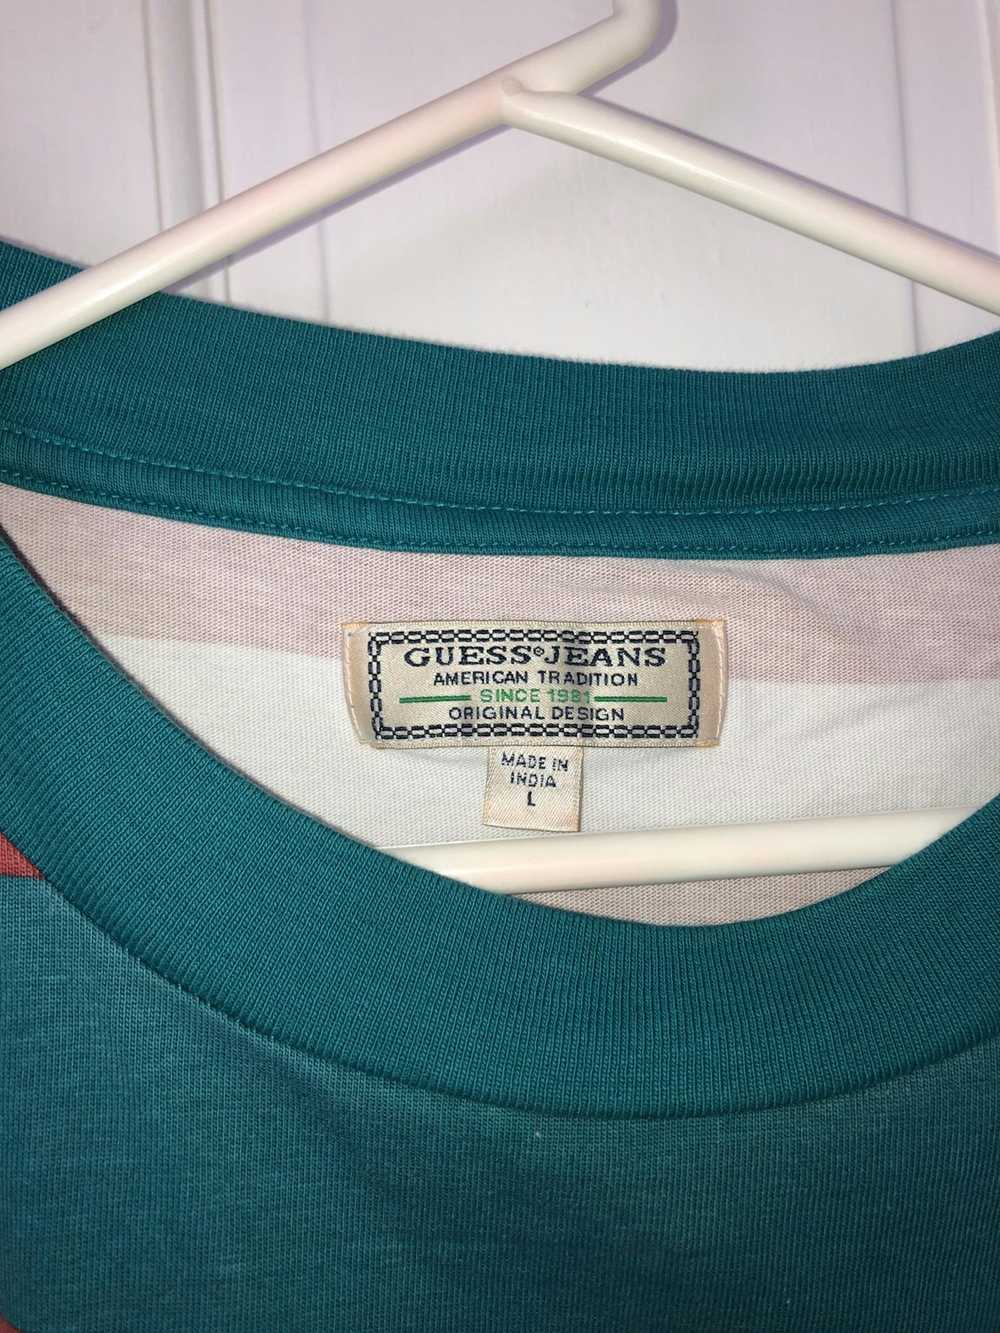 Guess Vintage Guess American Tradition Original D… - image 2